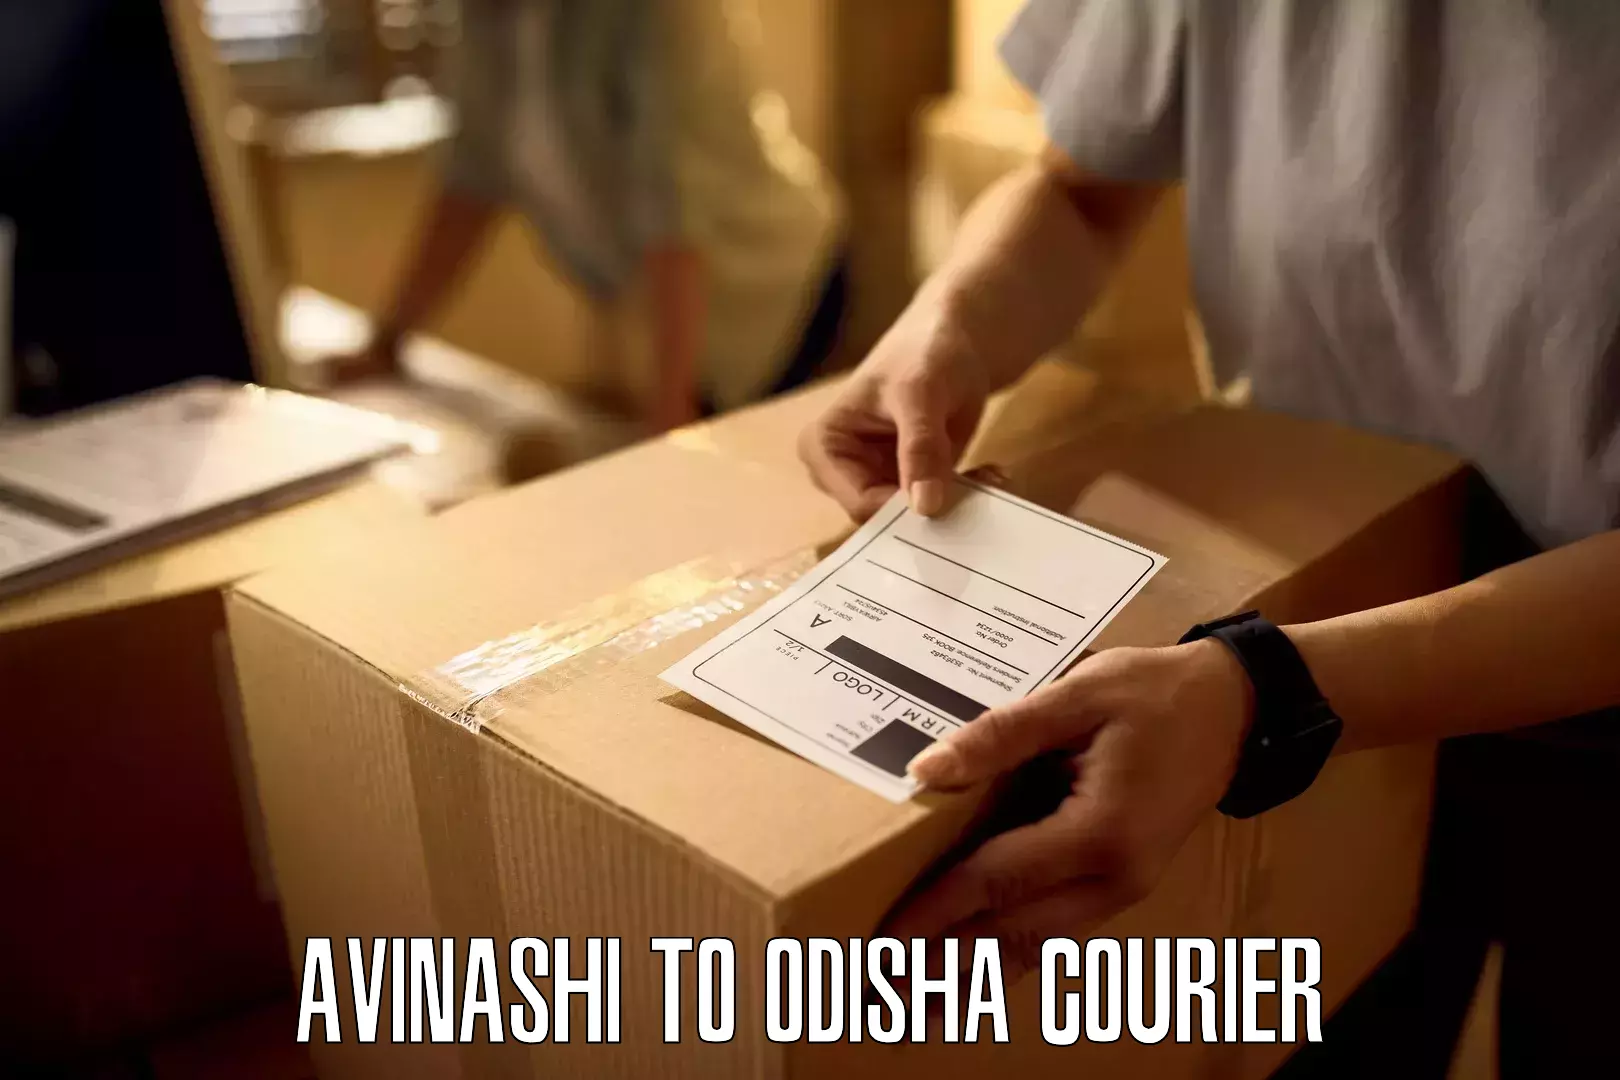 State-of-the-art courier technology Avinashi to Chandikhol